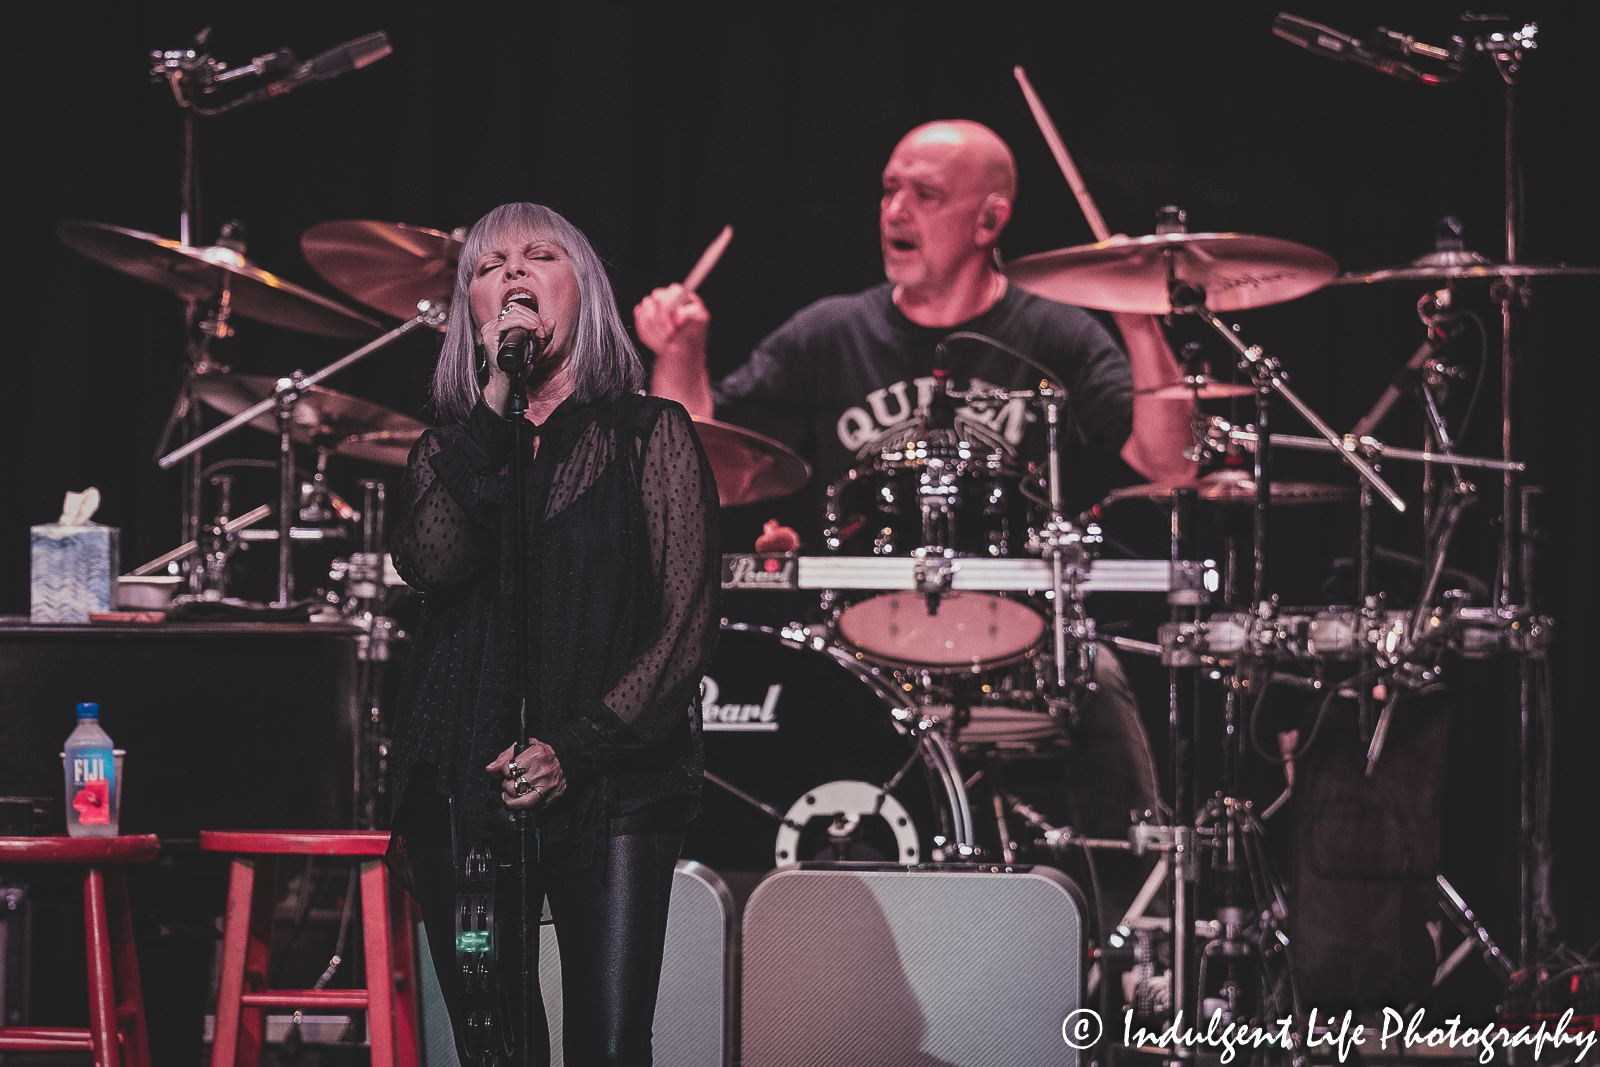 Pat Benatar with drummer Chris Ralles performing "No You Don't" from her debut album live at Uptown Theater in Kansas City, MO on August 2, 2022.